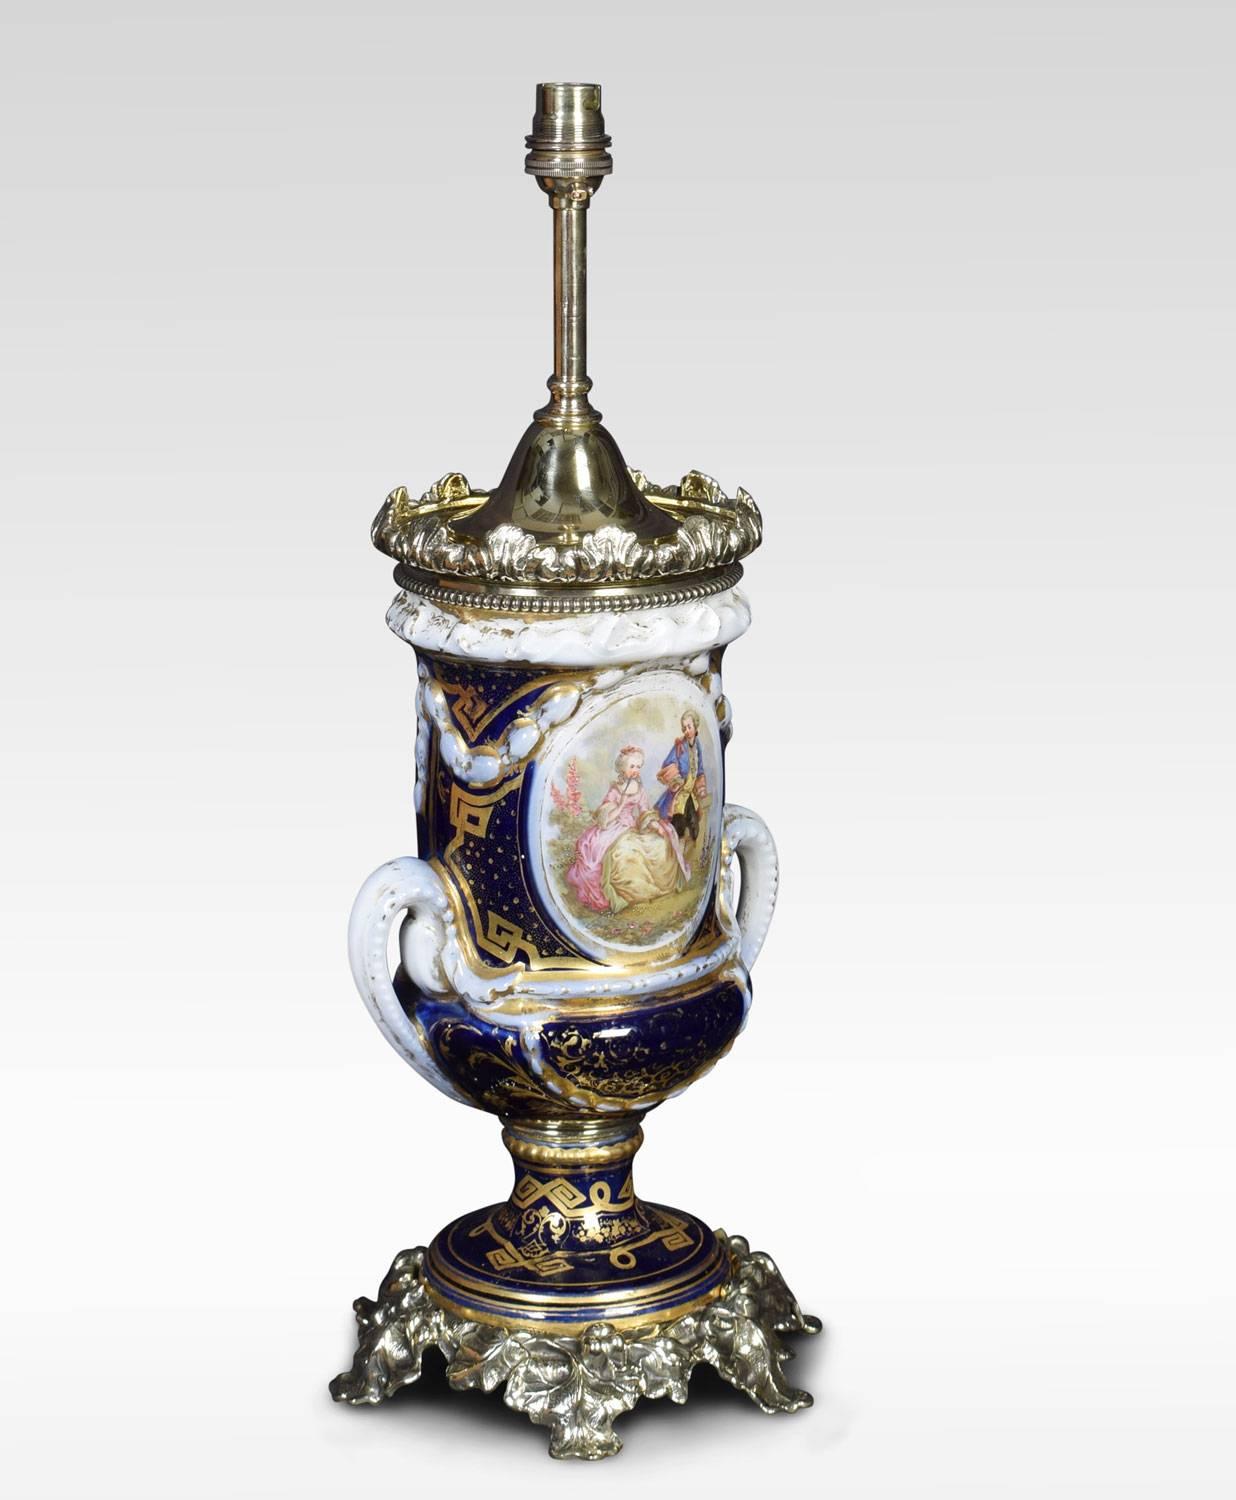 Sevres style twin handle table lamp, hand painted in cobalt blue with gold detail. Featuring a central 17th century courting couple the opposing side with floral motifs. Raised up on giltwood base. (The lamp has been rewired)
Dimensions:
Height